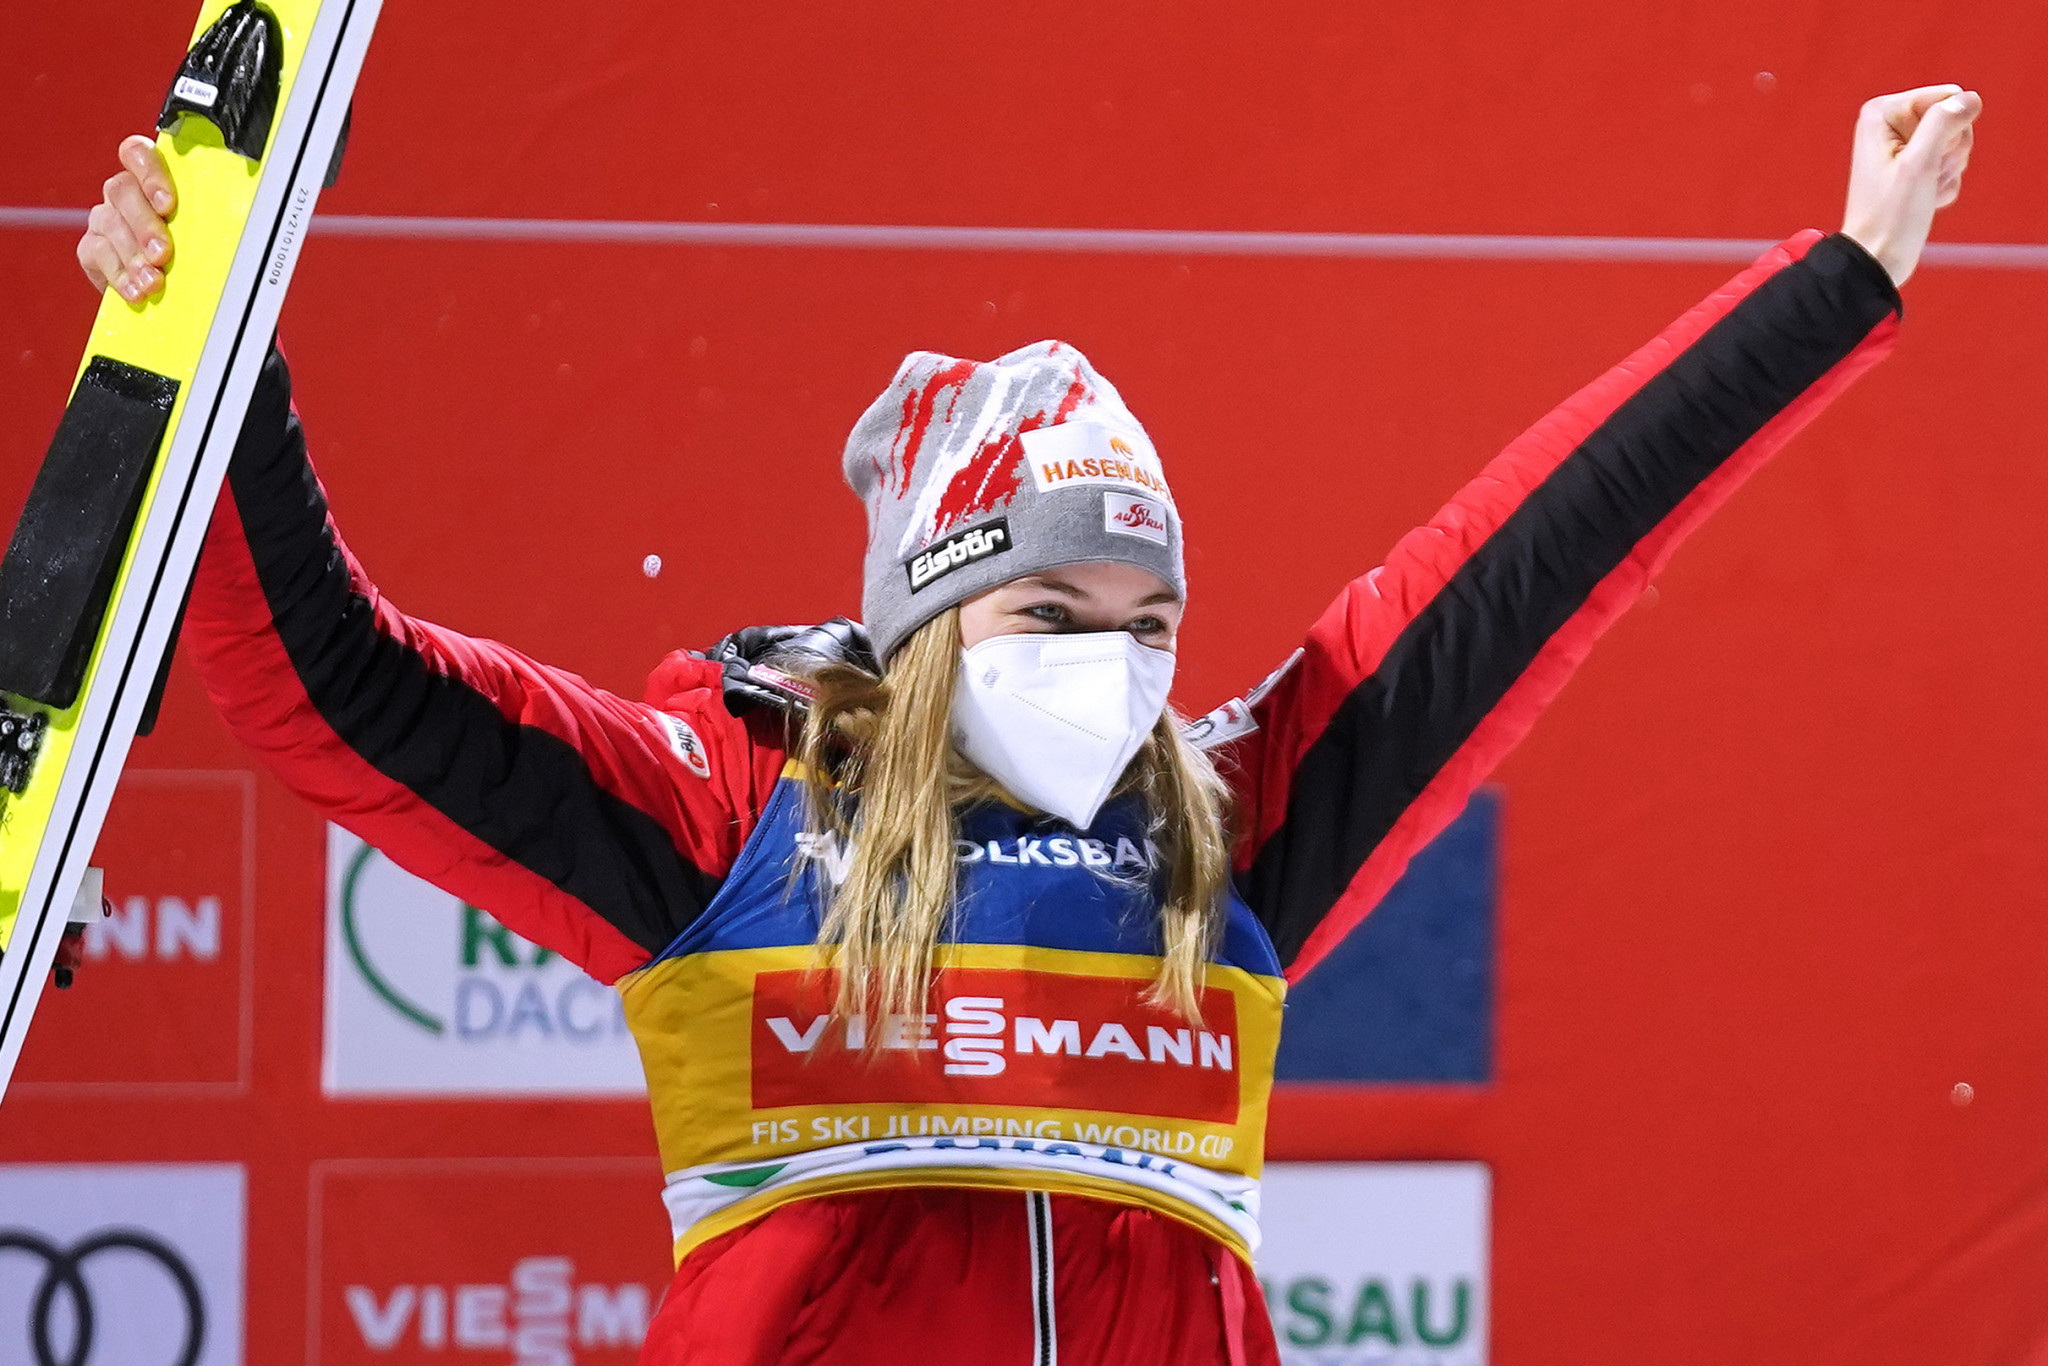 Kramer continues to impress with FIS Women's Ski Jumping World Cup win in Ramsau